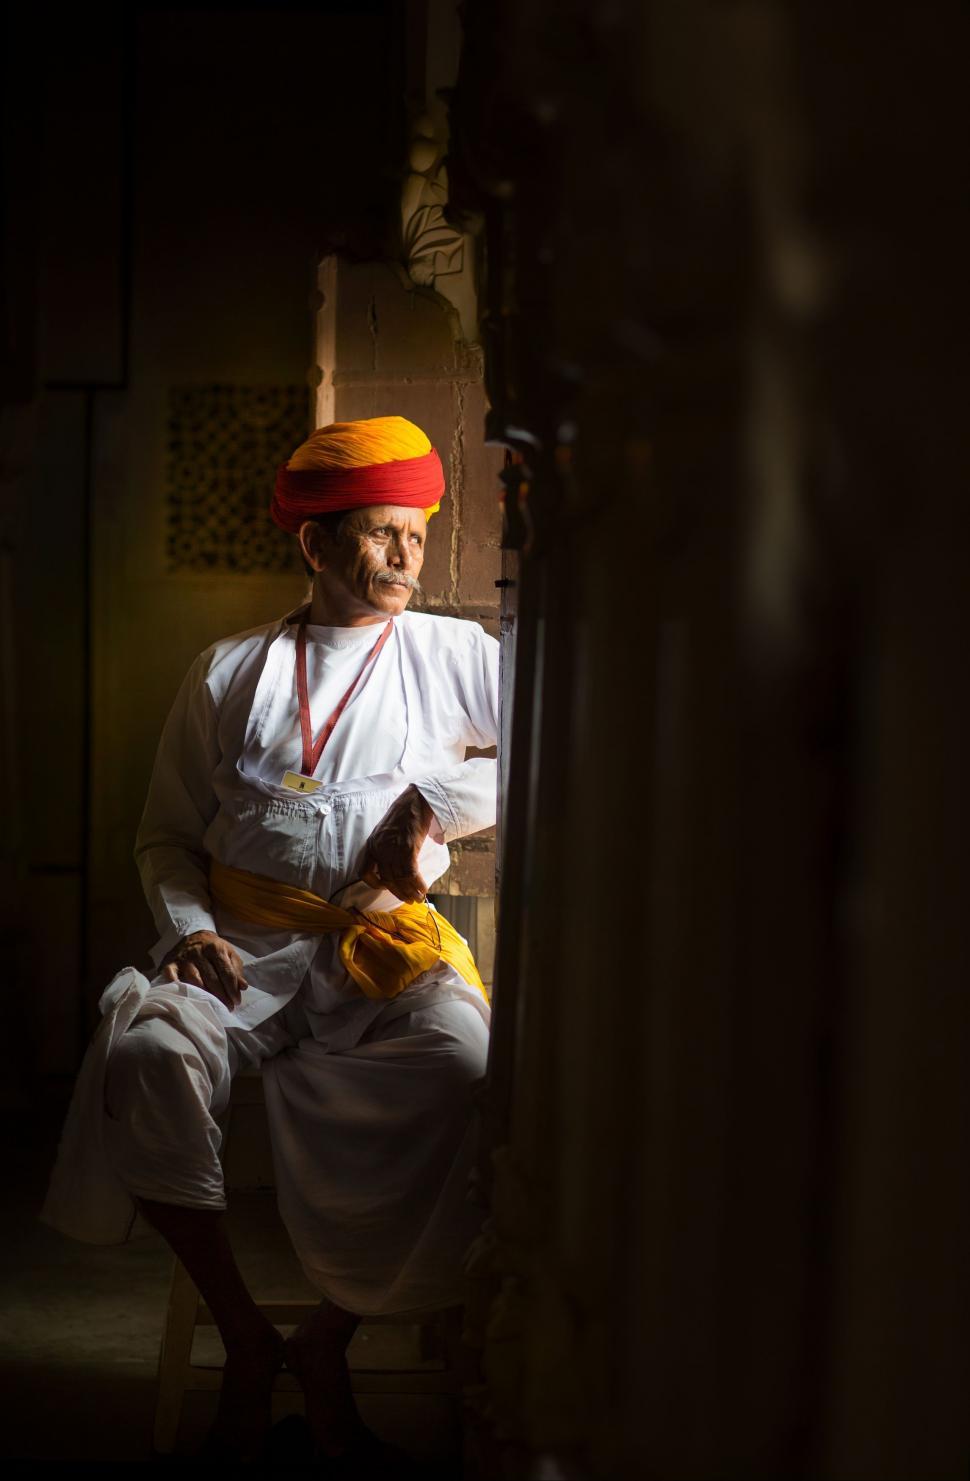 Free Image of A Man in a Turban Sitting on a Chair 